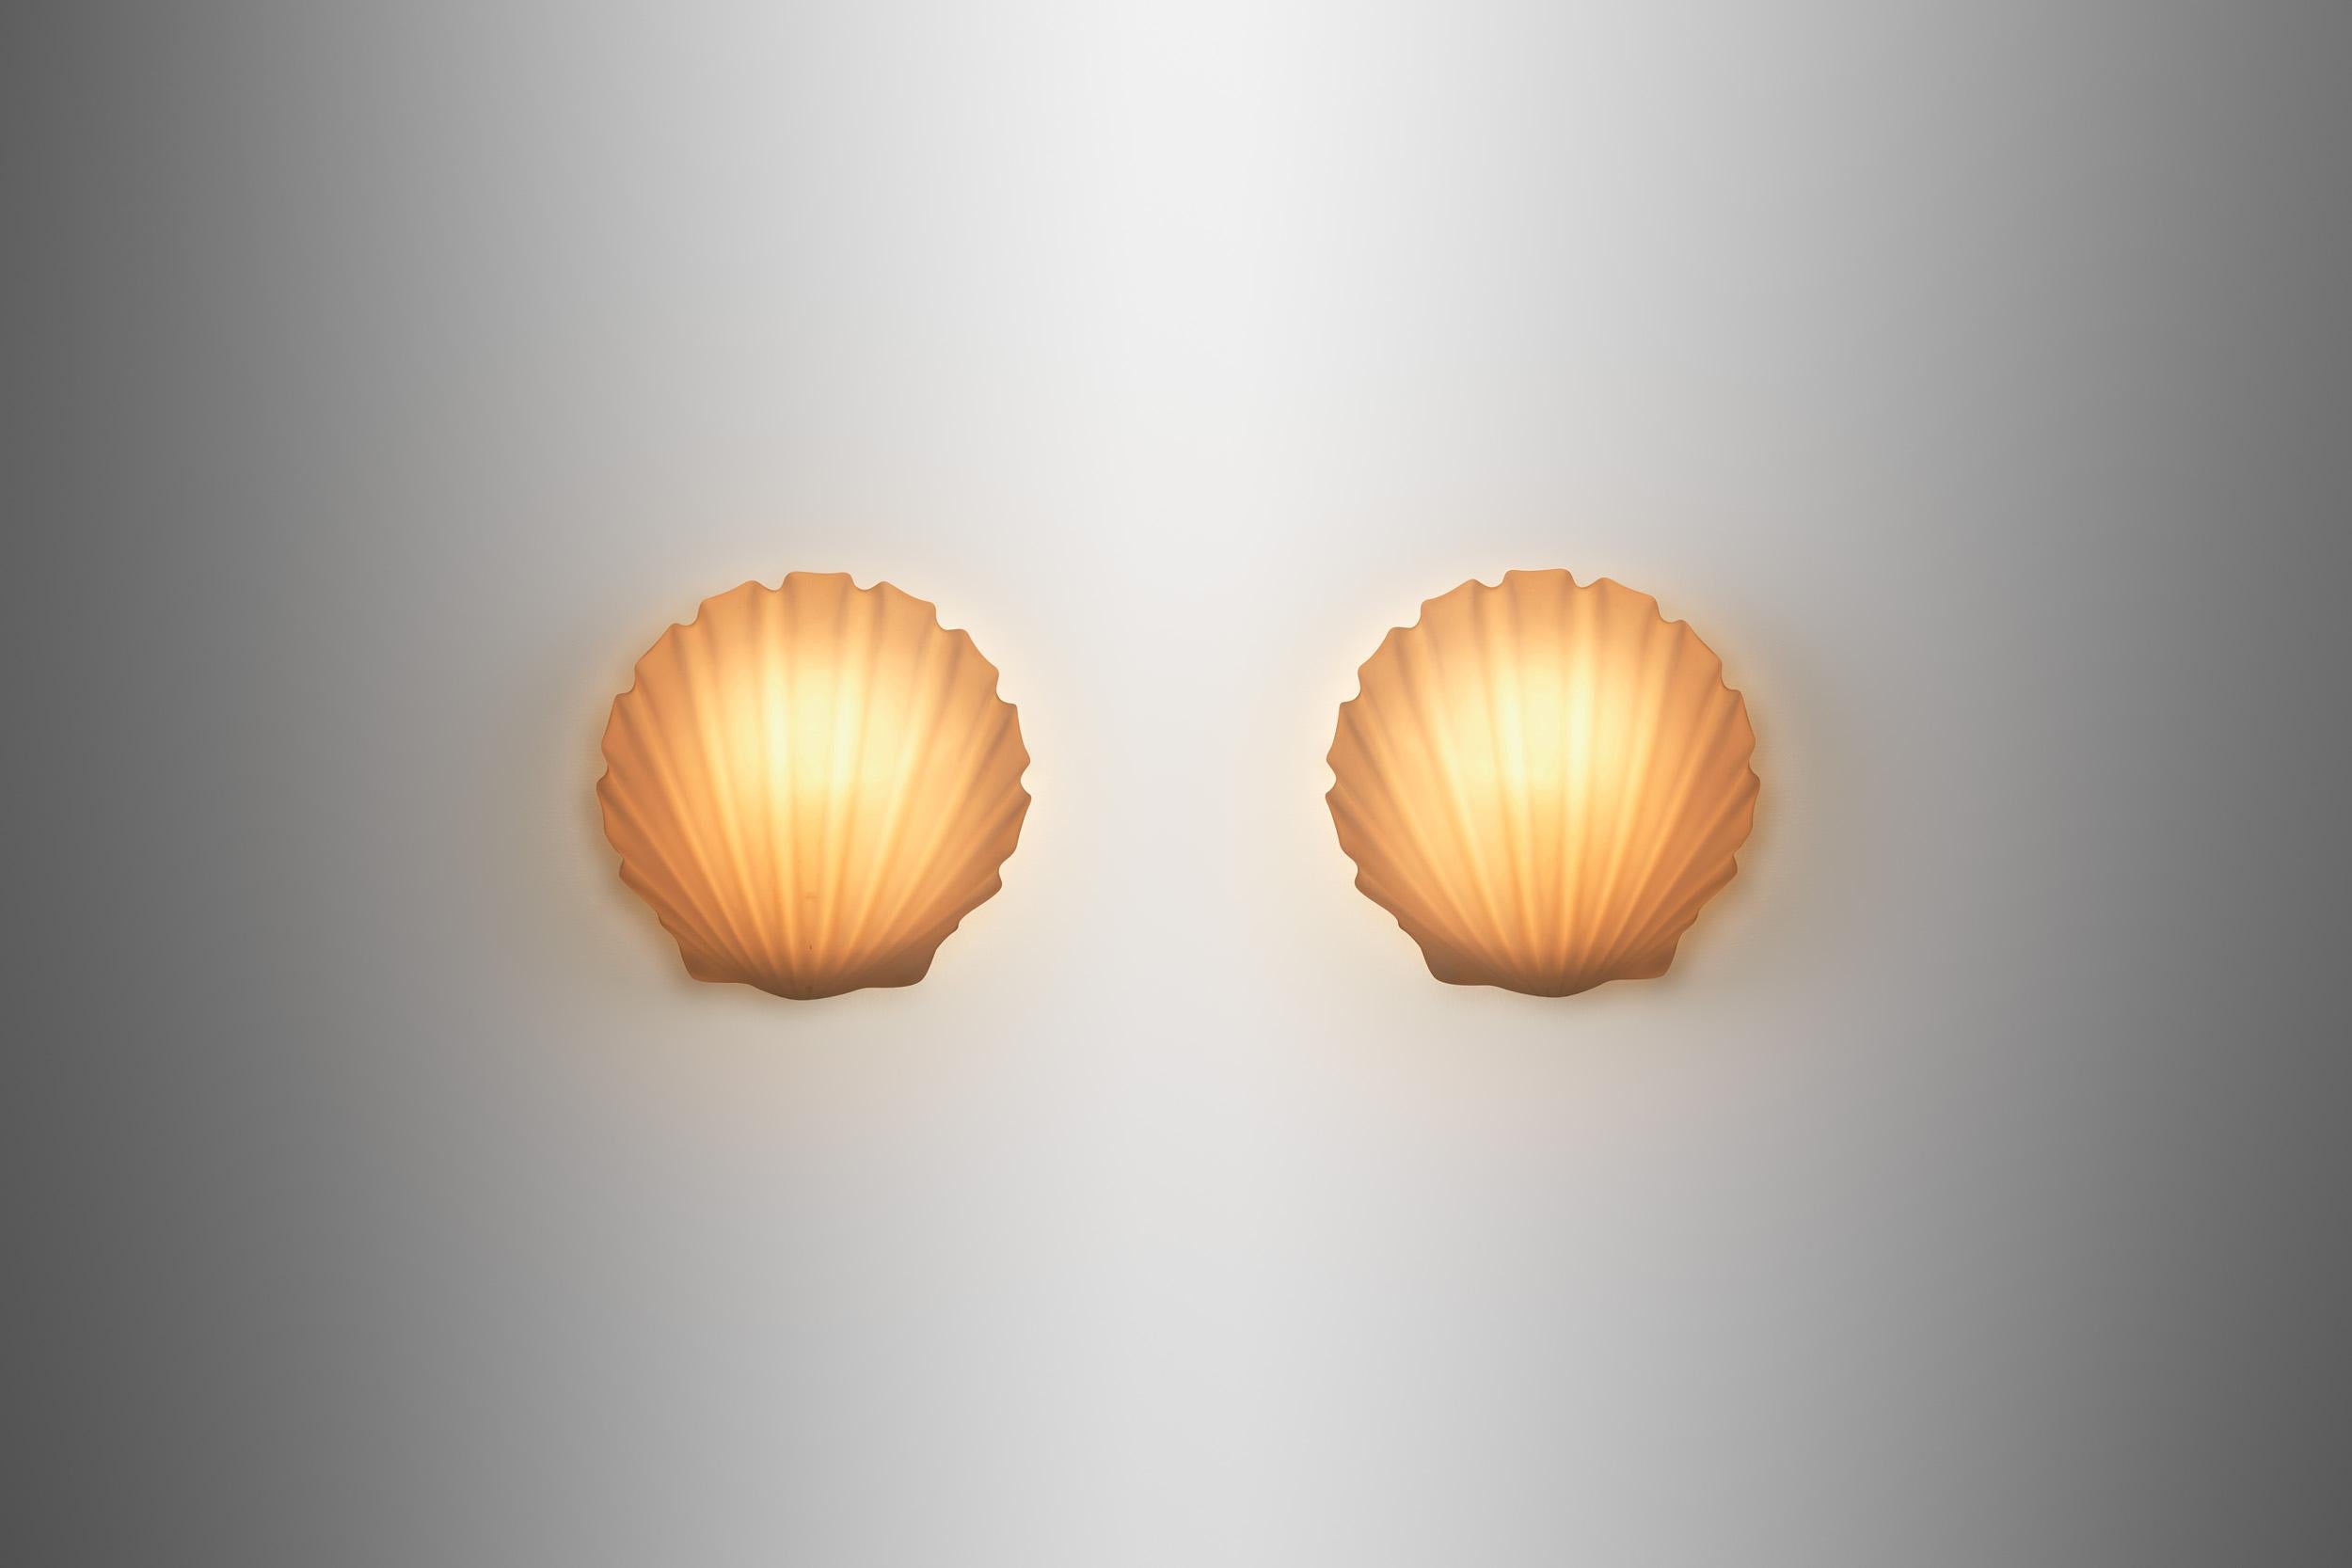 Pair of Opal Glass Seashell Wall Lamps by Glashütte Limburg, Germany 1970s In Good Condition For Sale In Utrecht, NL